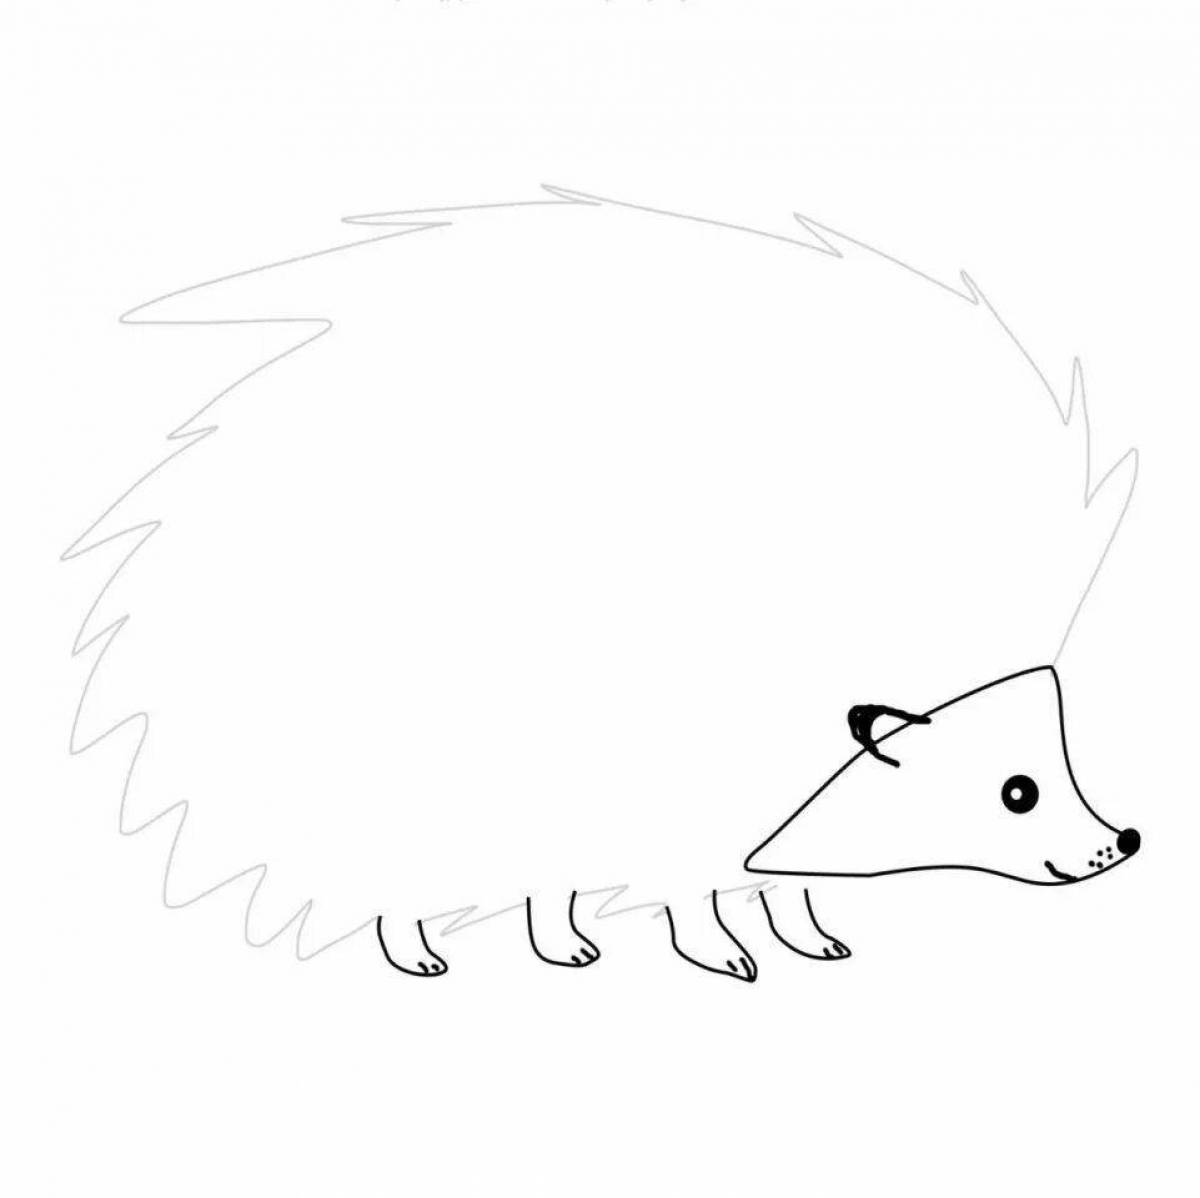 Playful coloring hedgehog without thorns